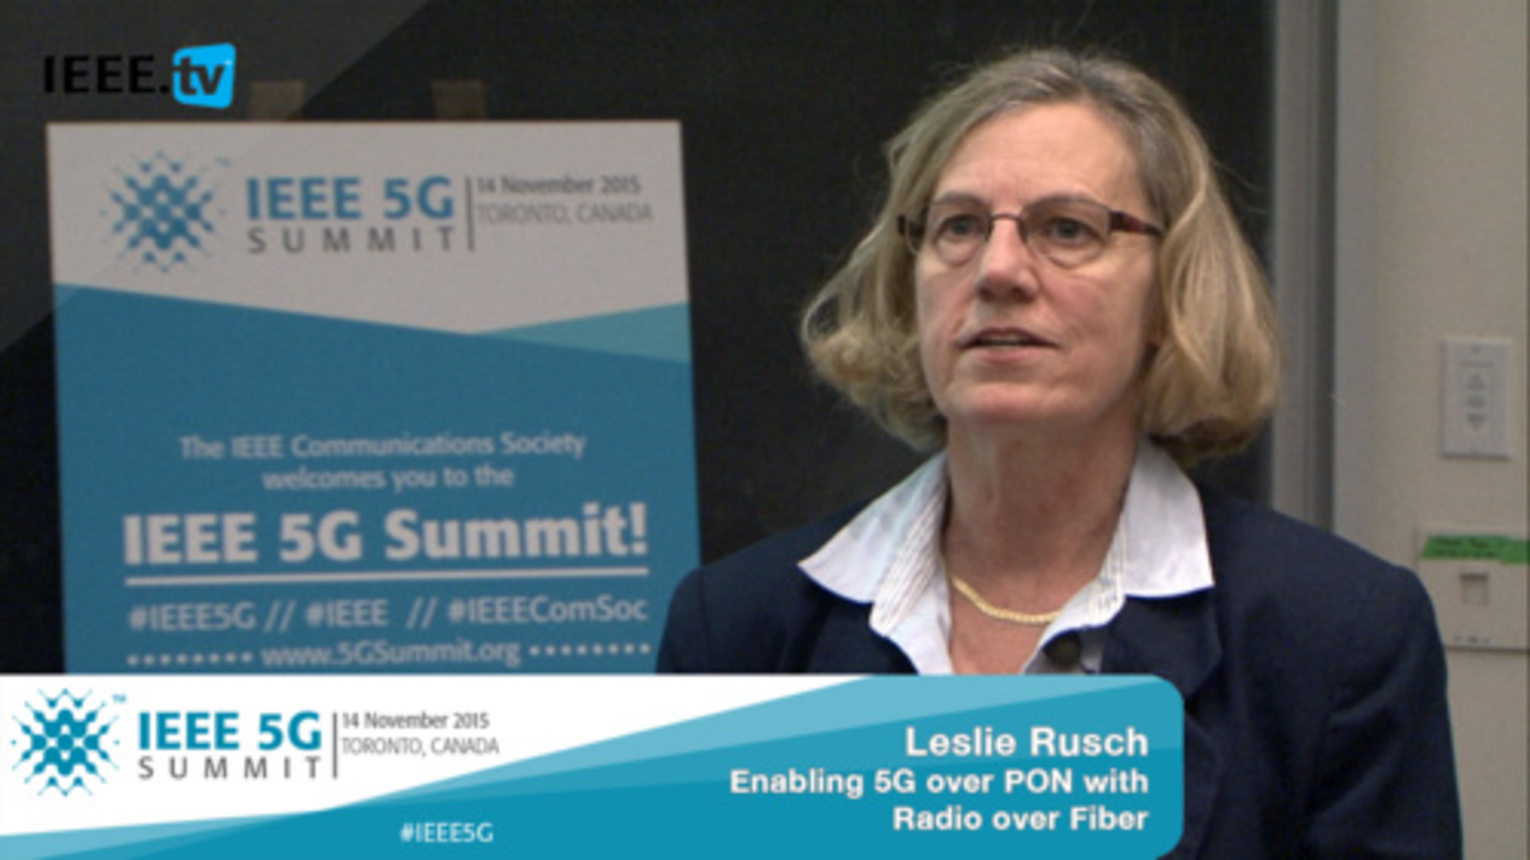 Toronto 5G Summit - 2015 - Leslie A. Rusch - Enabling 5G over PON with Radio over Fiberd